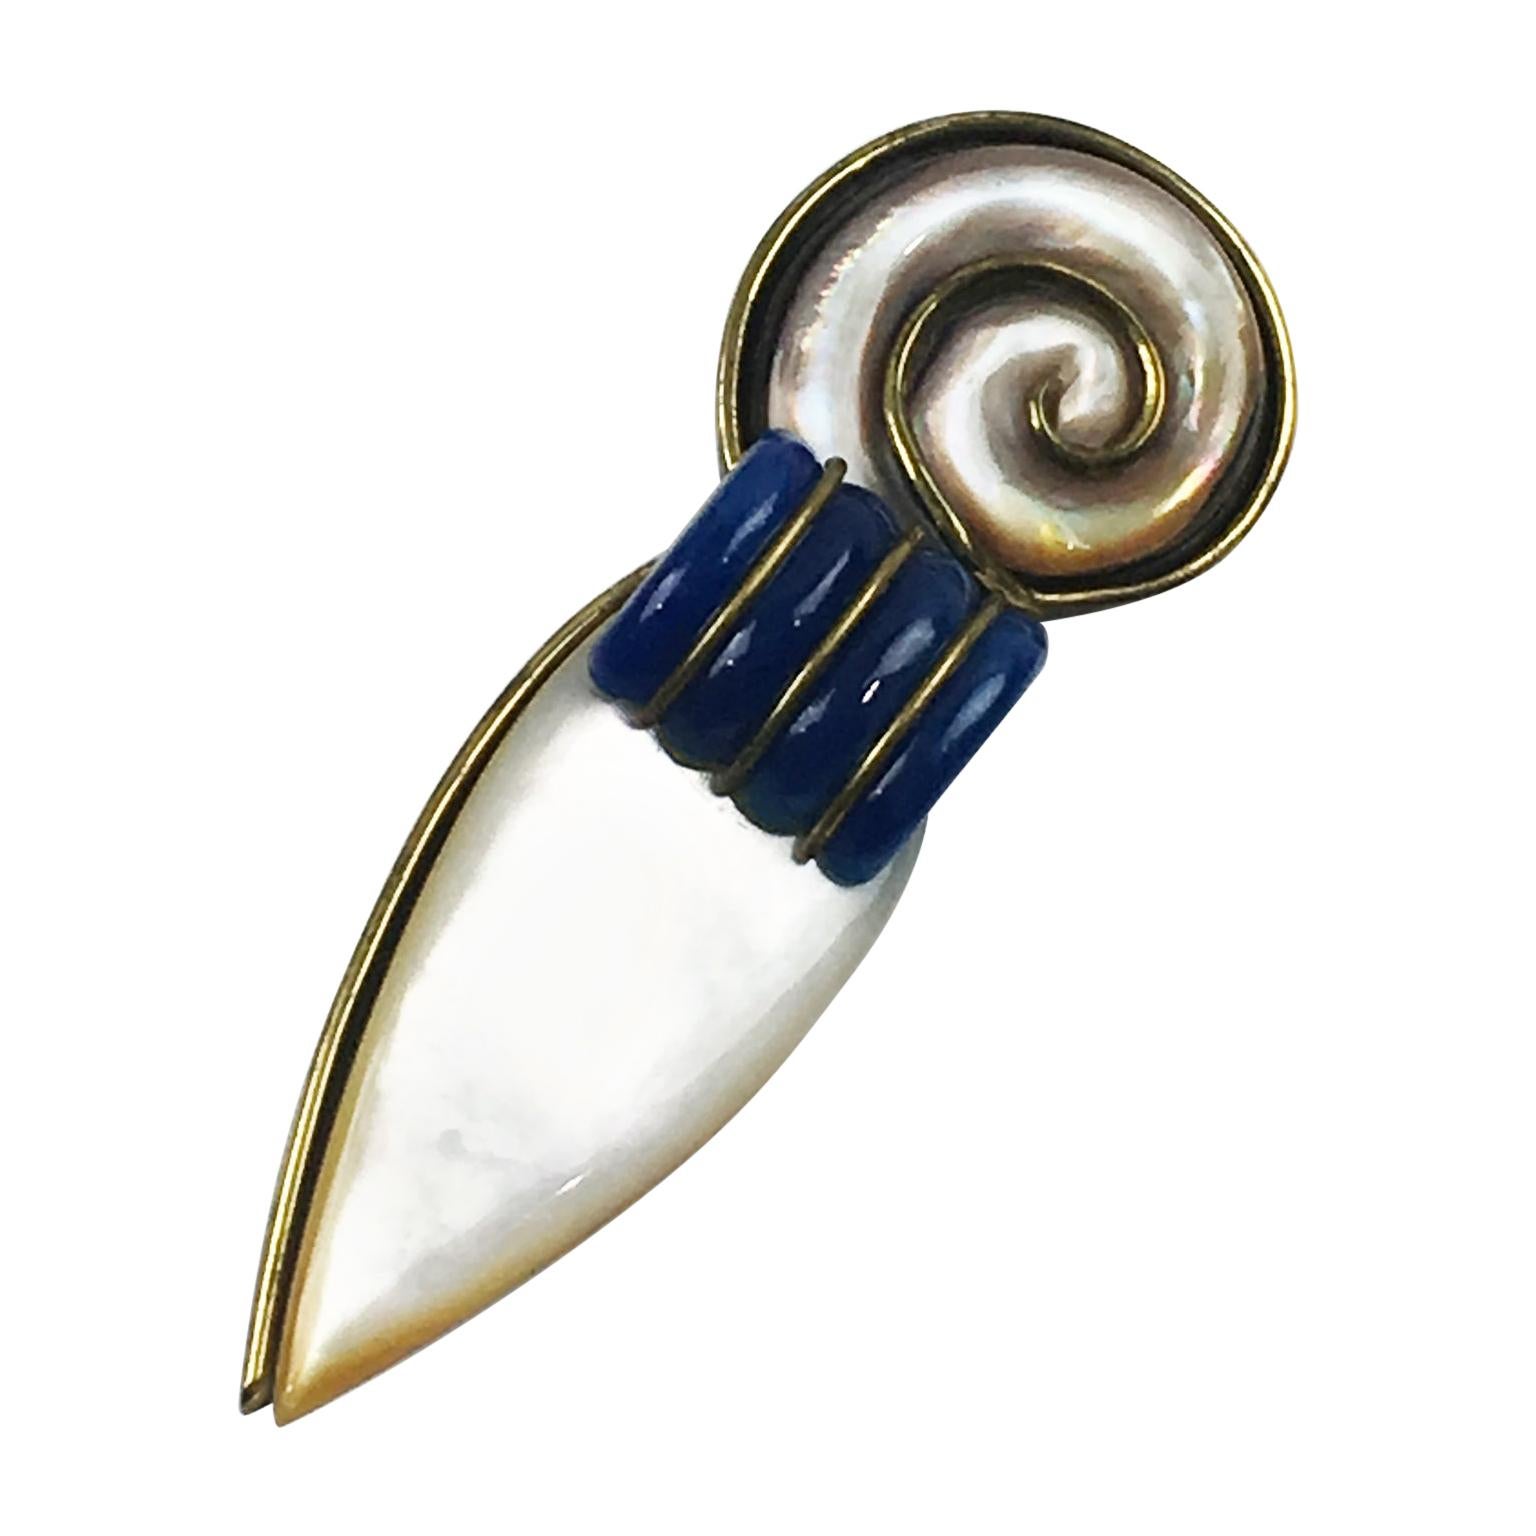 Fabrice Paris Art Deco Mother of Pearl Brass Pin Brooch 